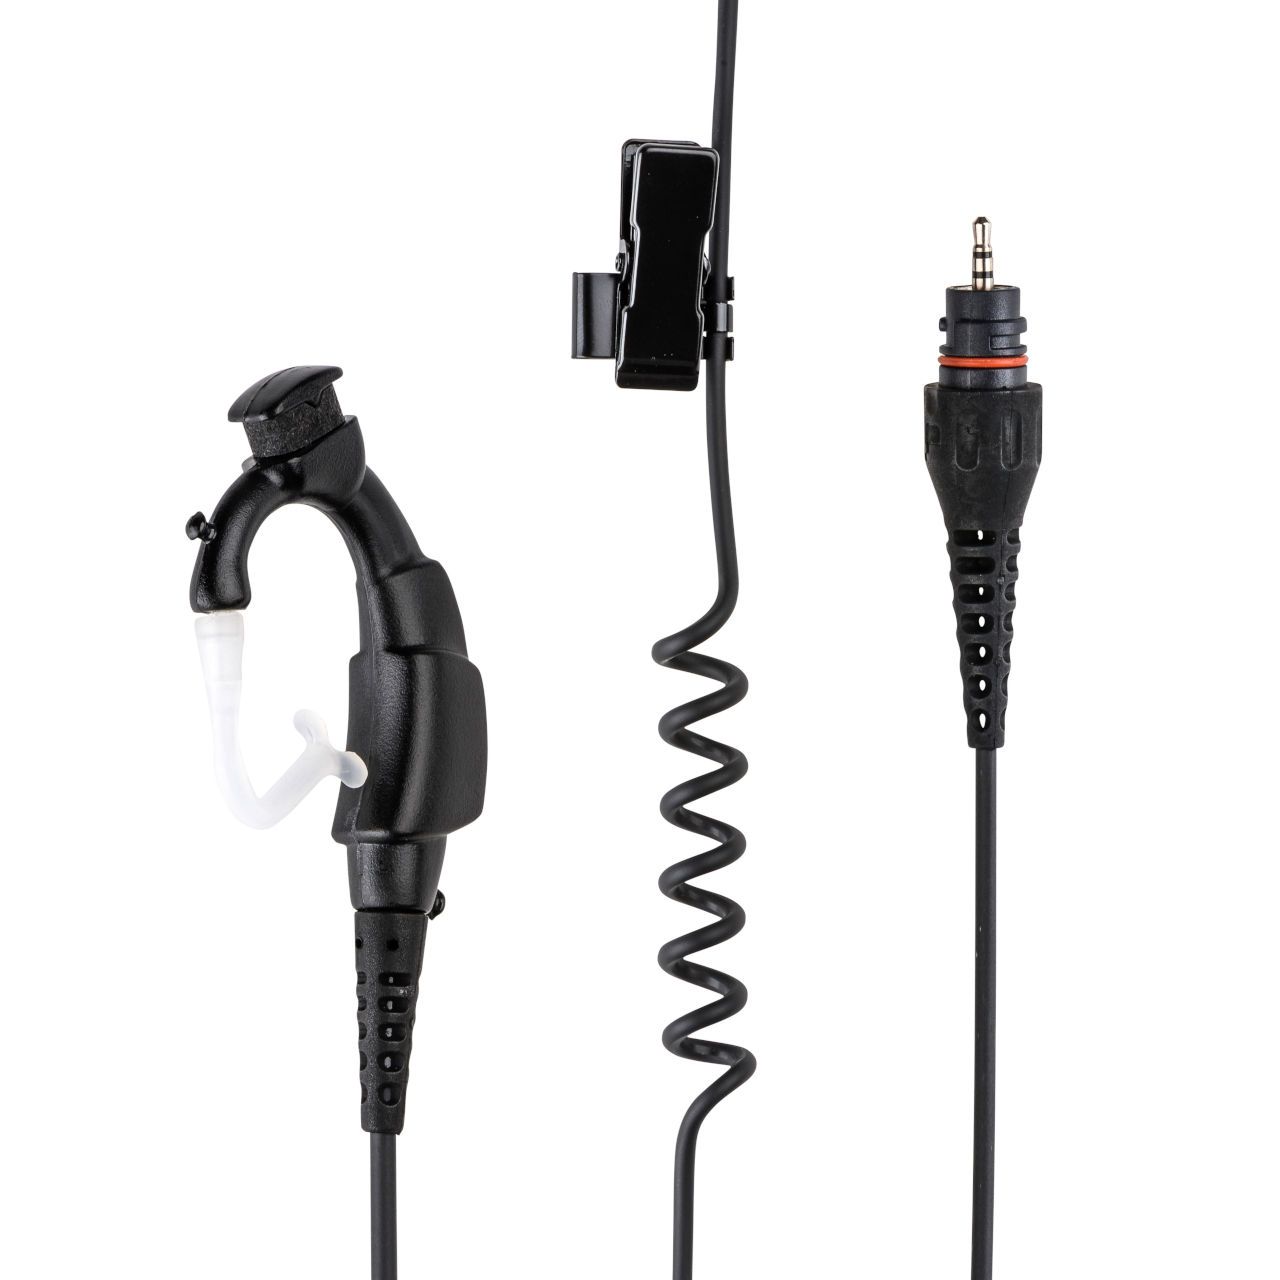 Motorola Wireless Earpiece with 12 inch cable